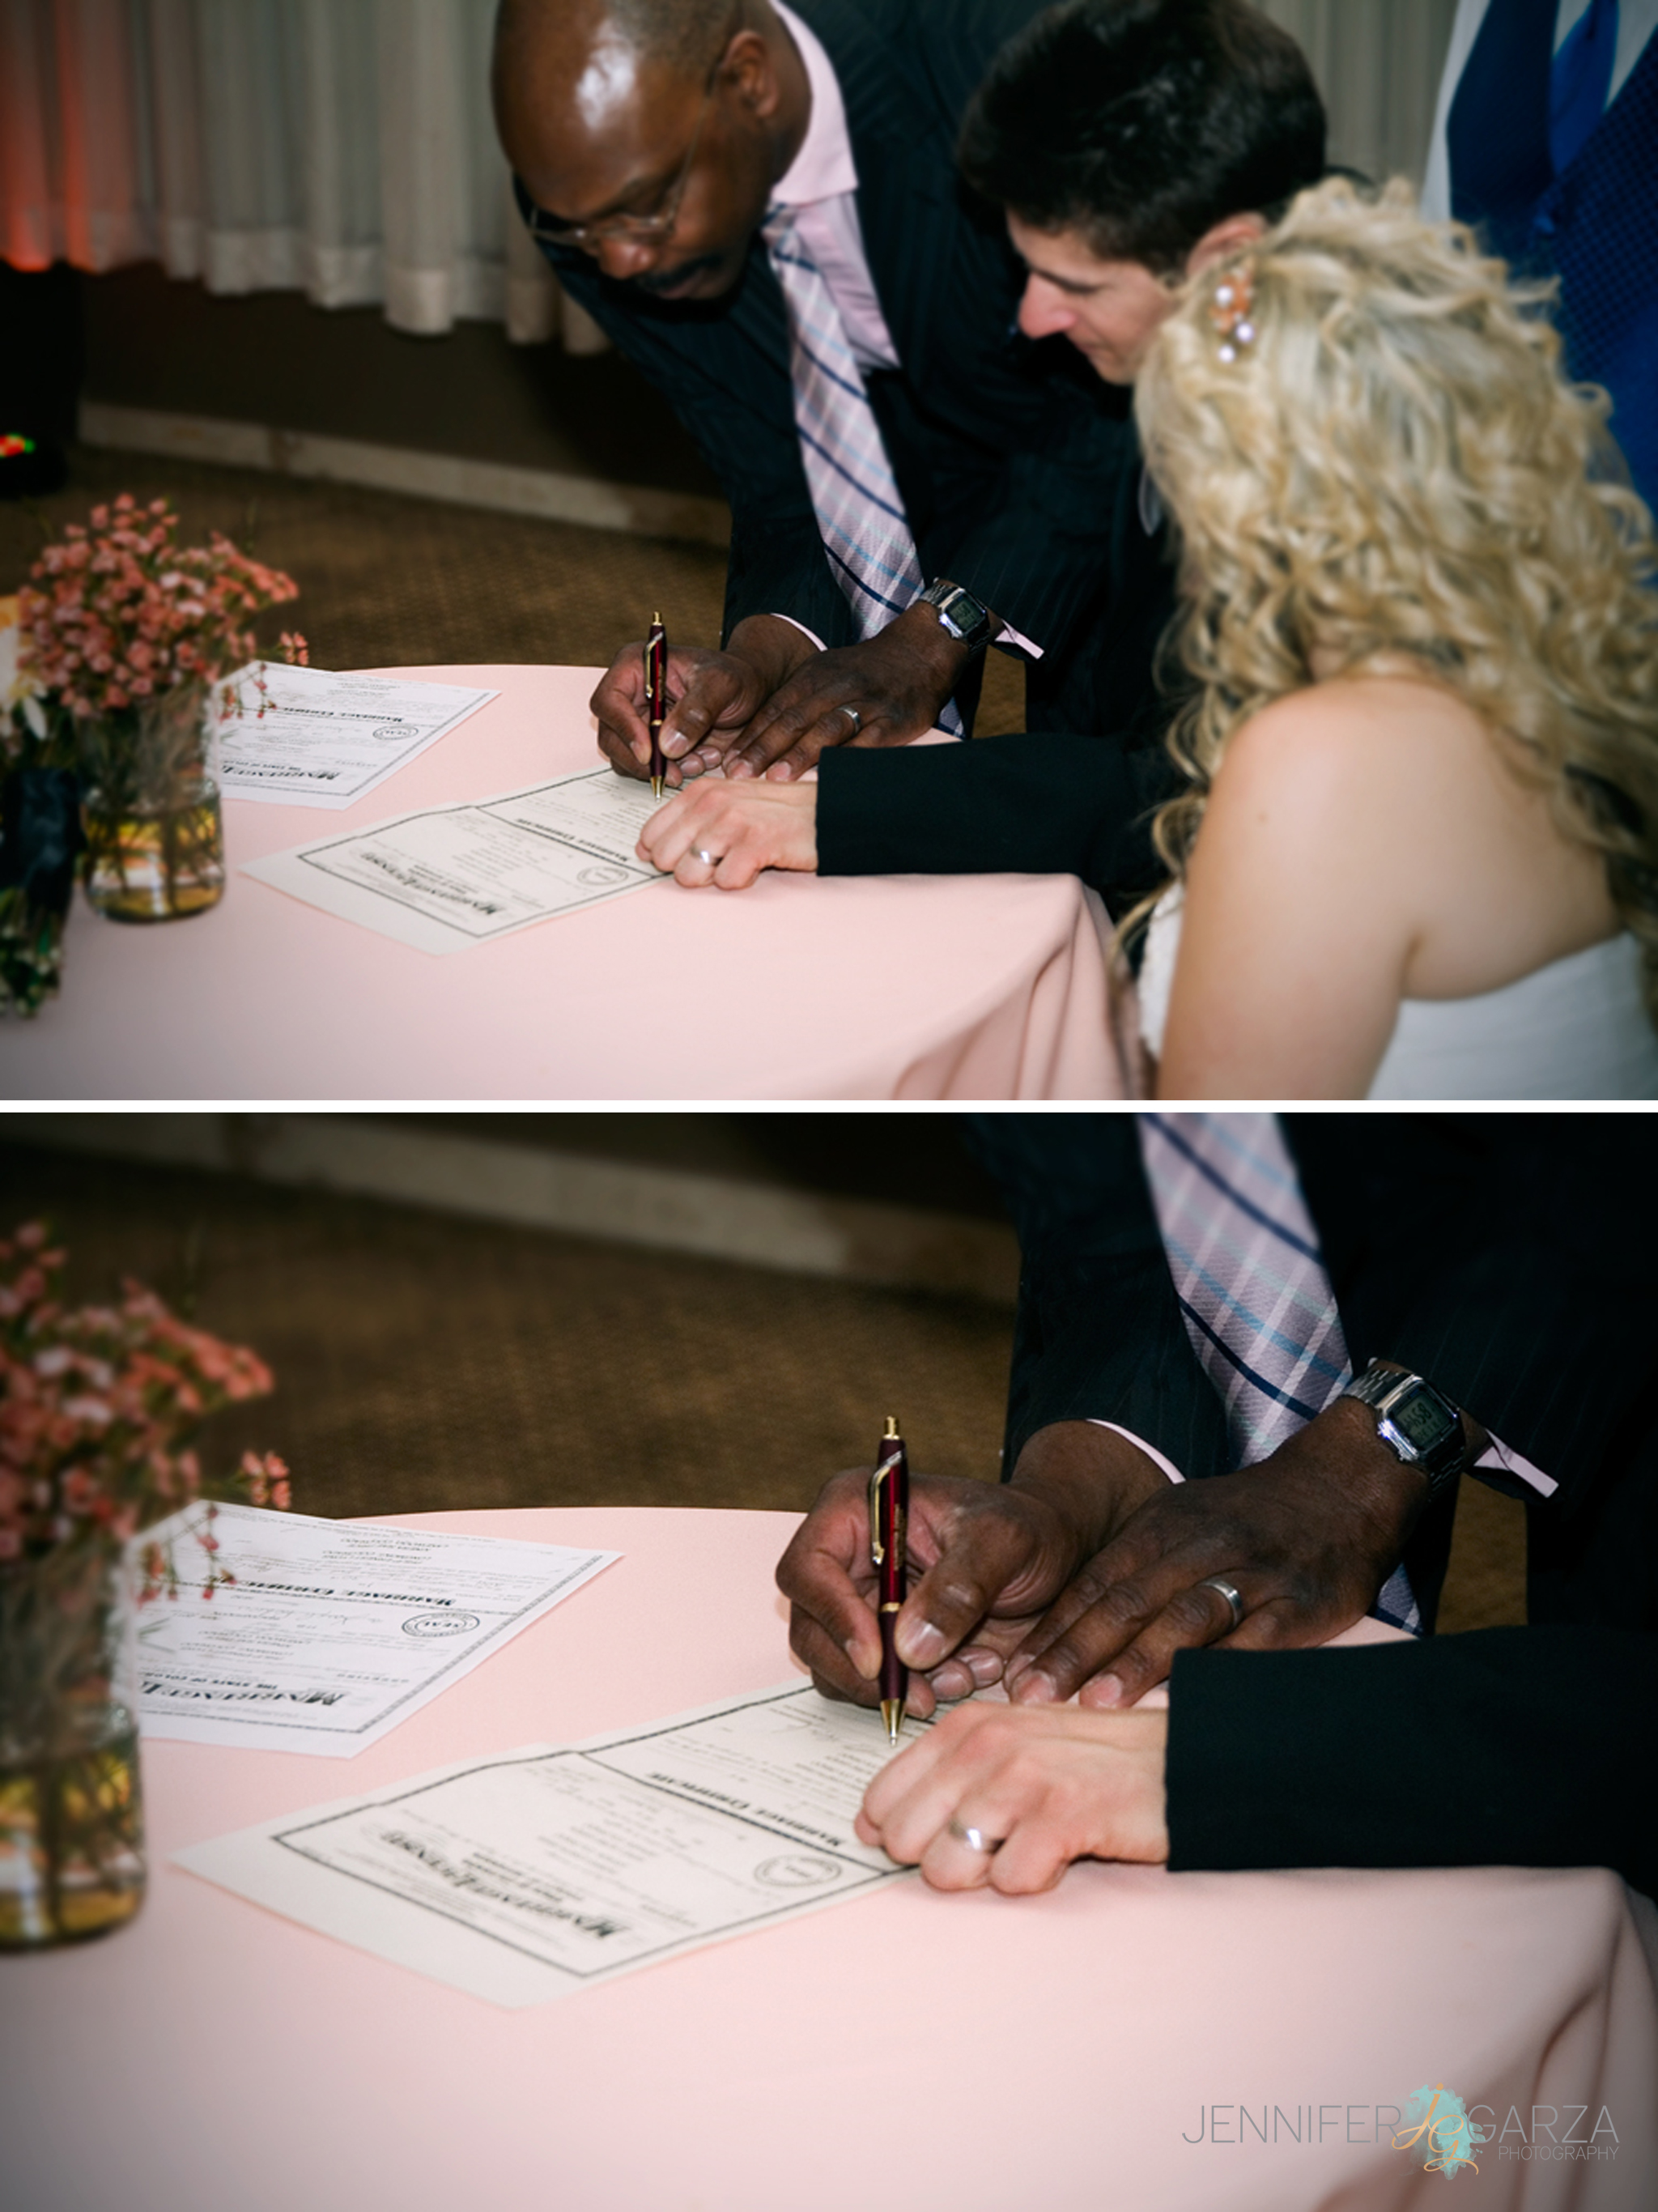 Bride & Groom signing their marriage license during the wedding reception. Annie & Tom’s Stonebrook Manor Event Center Wedding by Colorado Wedding Photographer, Jennifer Garza. Colorado Wedding Photographer, Denver Wedding Photographer, Colorado Wedding Photos, Denver Wedding Photos, Colorado Bride, Denver Bride, Stonebrook Manor Wedding, Stonebrook Manor, Rocky Mountain Bride, Couture Colorado